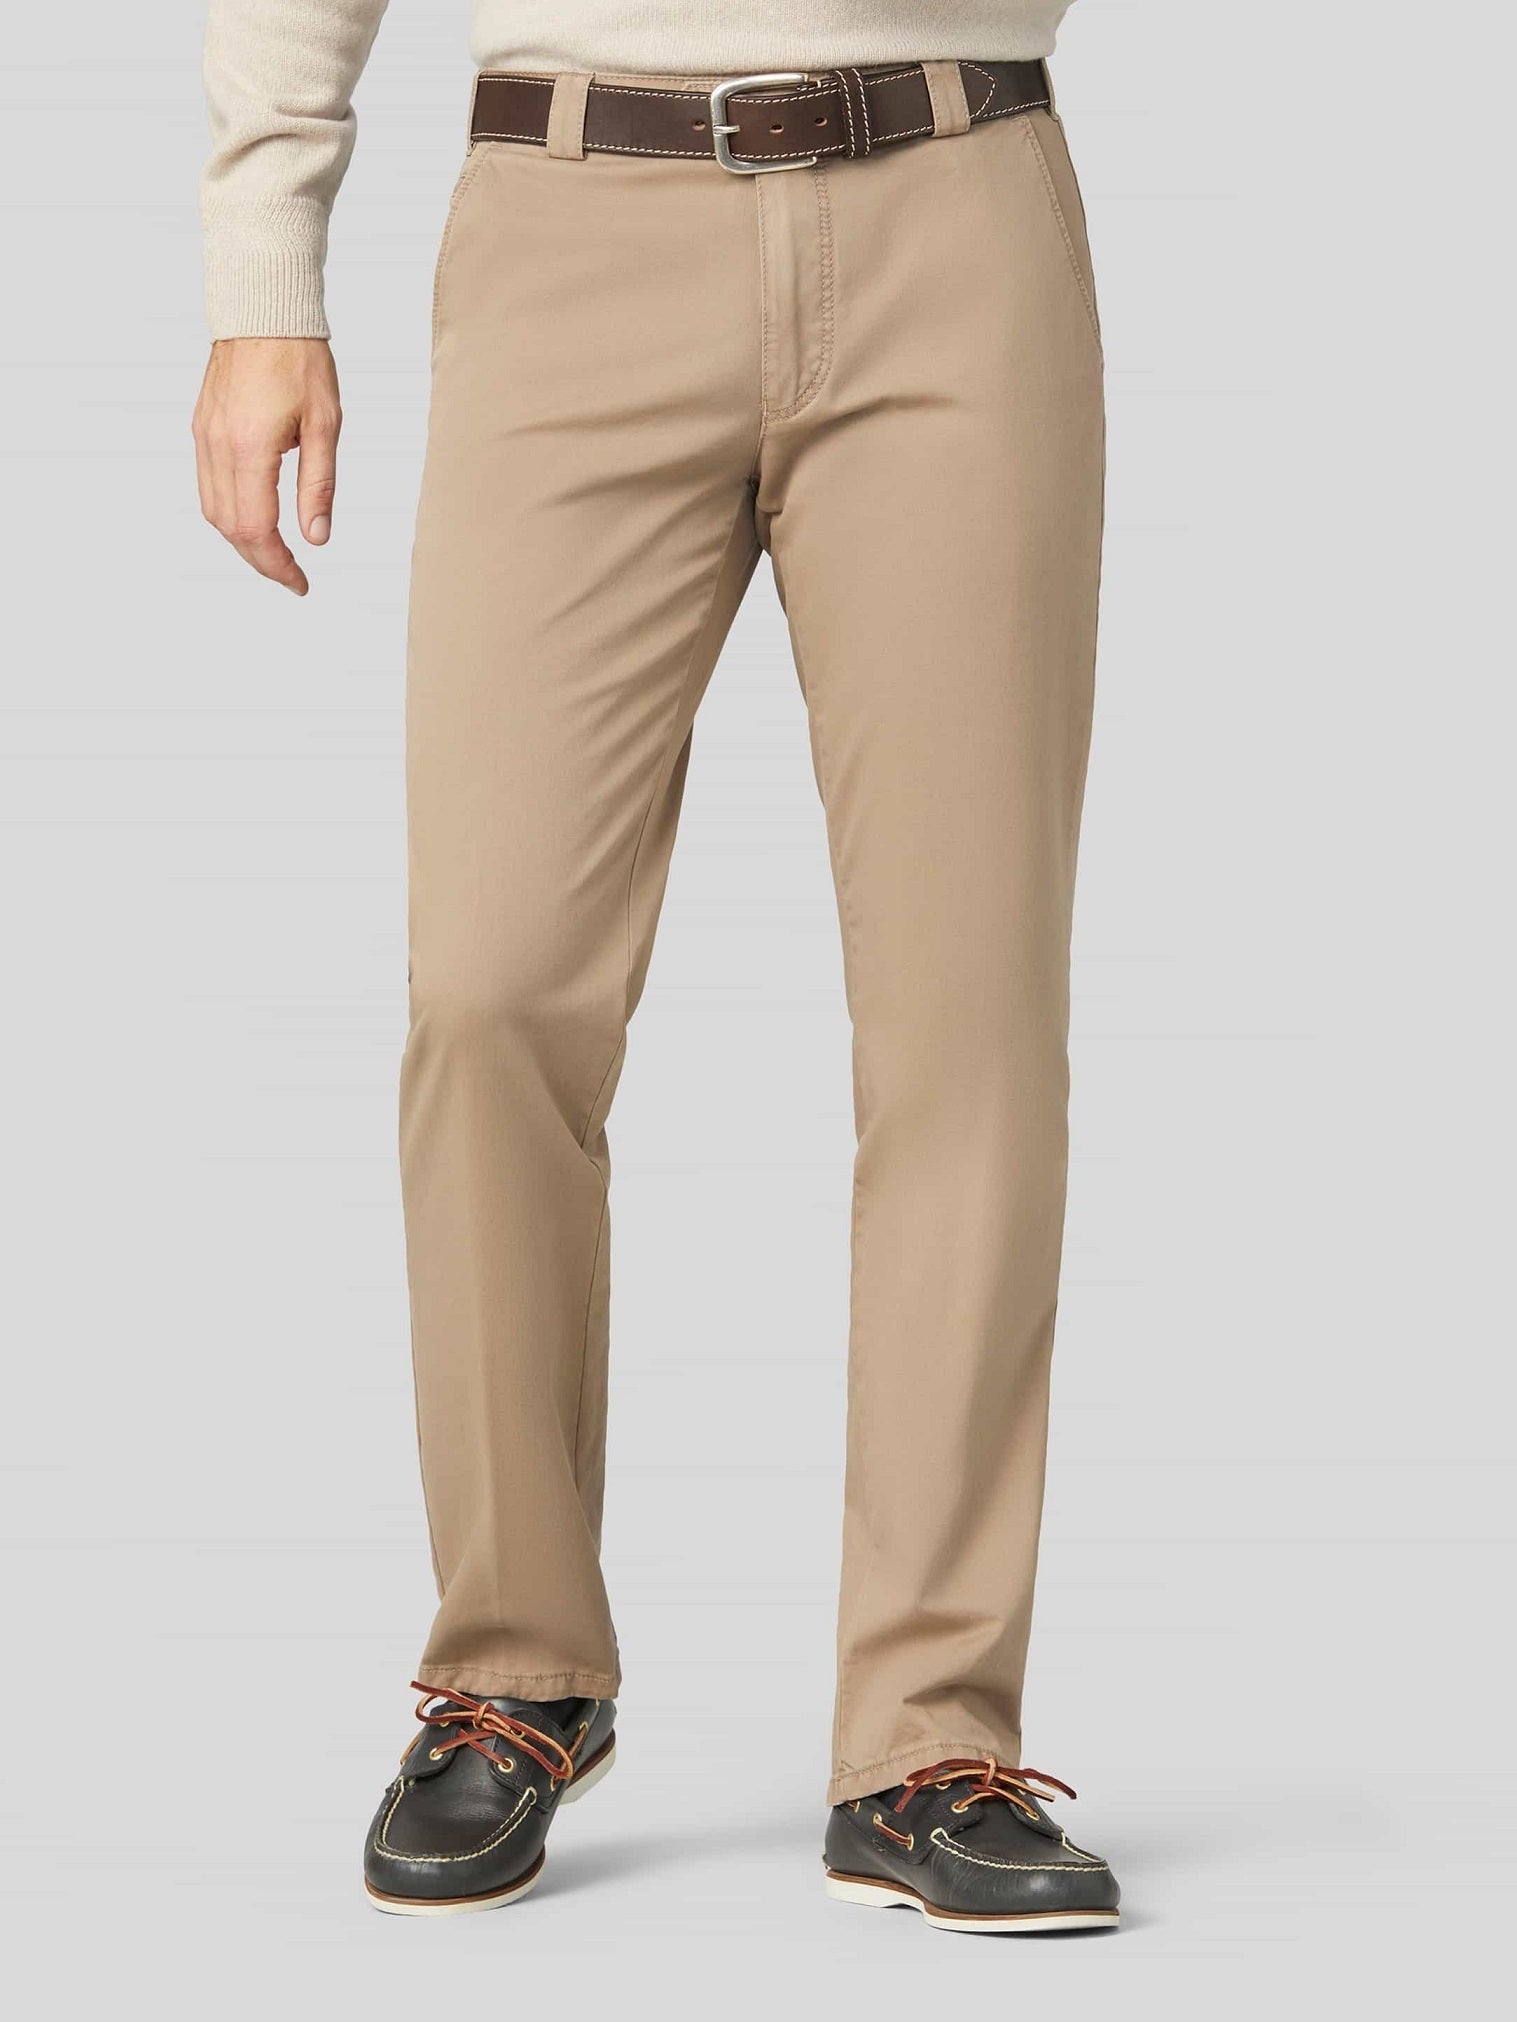 40% OFF MEYER Trousers - Roma 316 Luxury Cotton Chinos - Beige - Size 30 REG